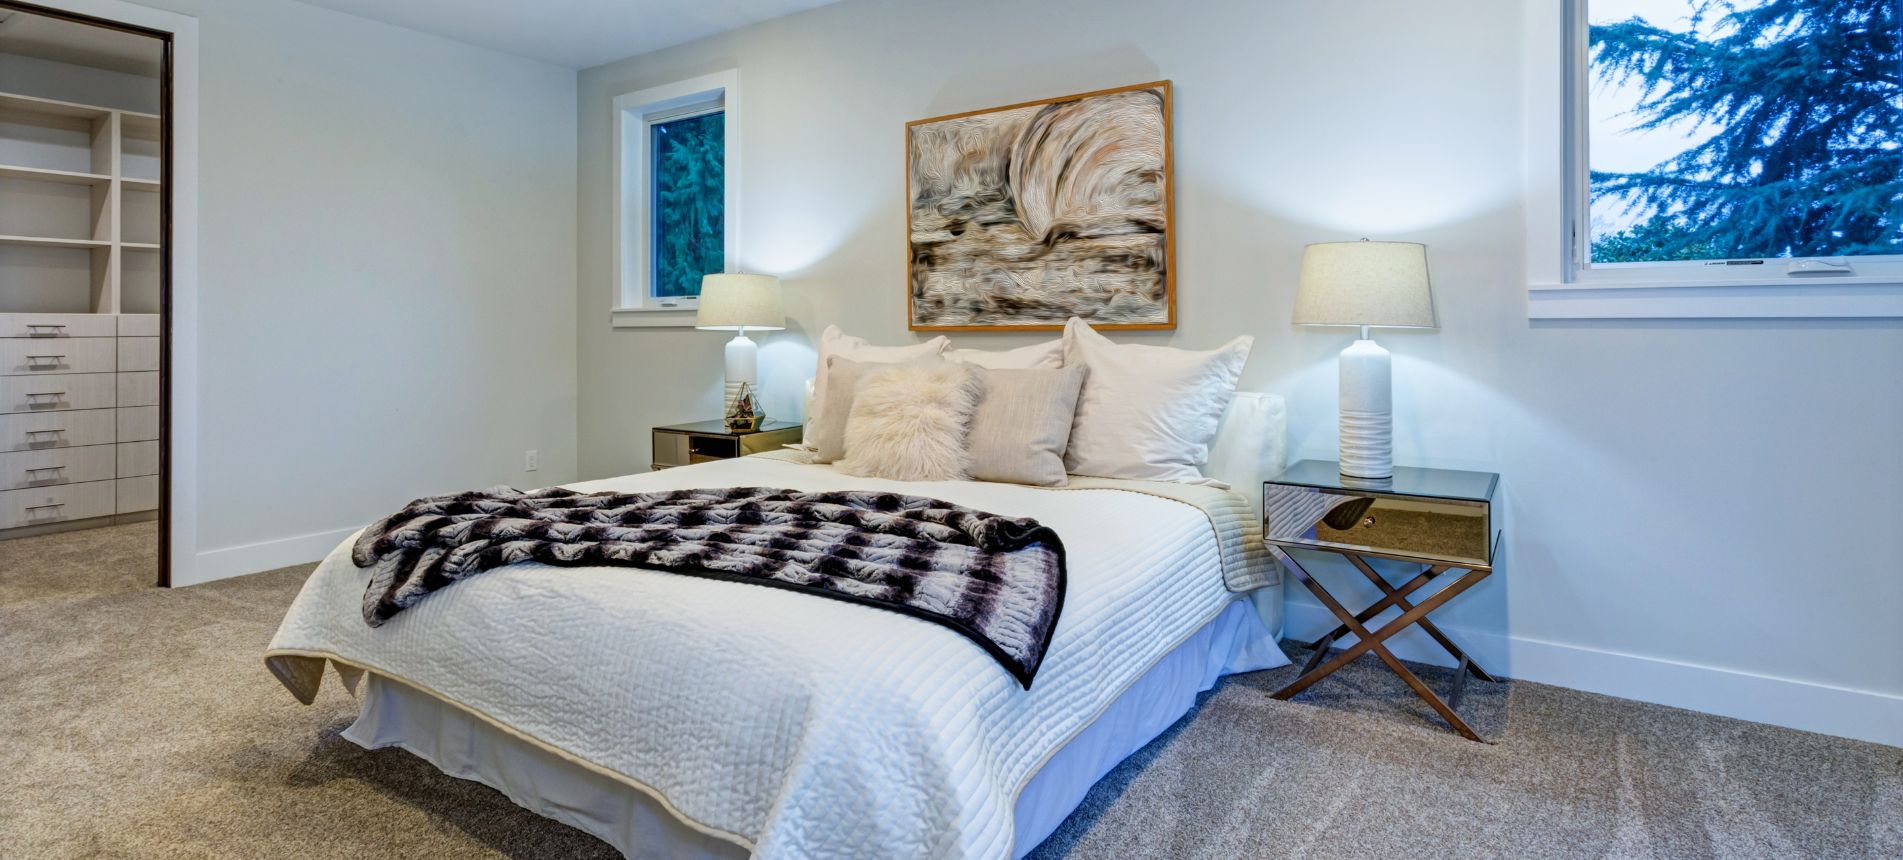 4 Ways To Make Your Guest Room a Cozier Place